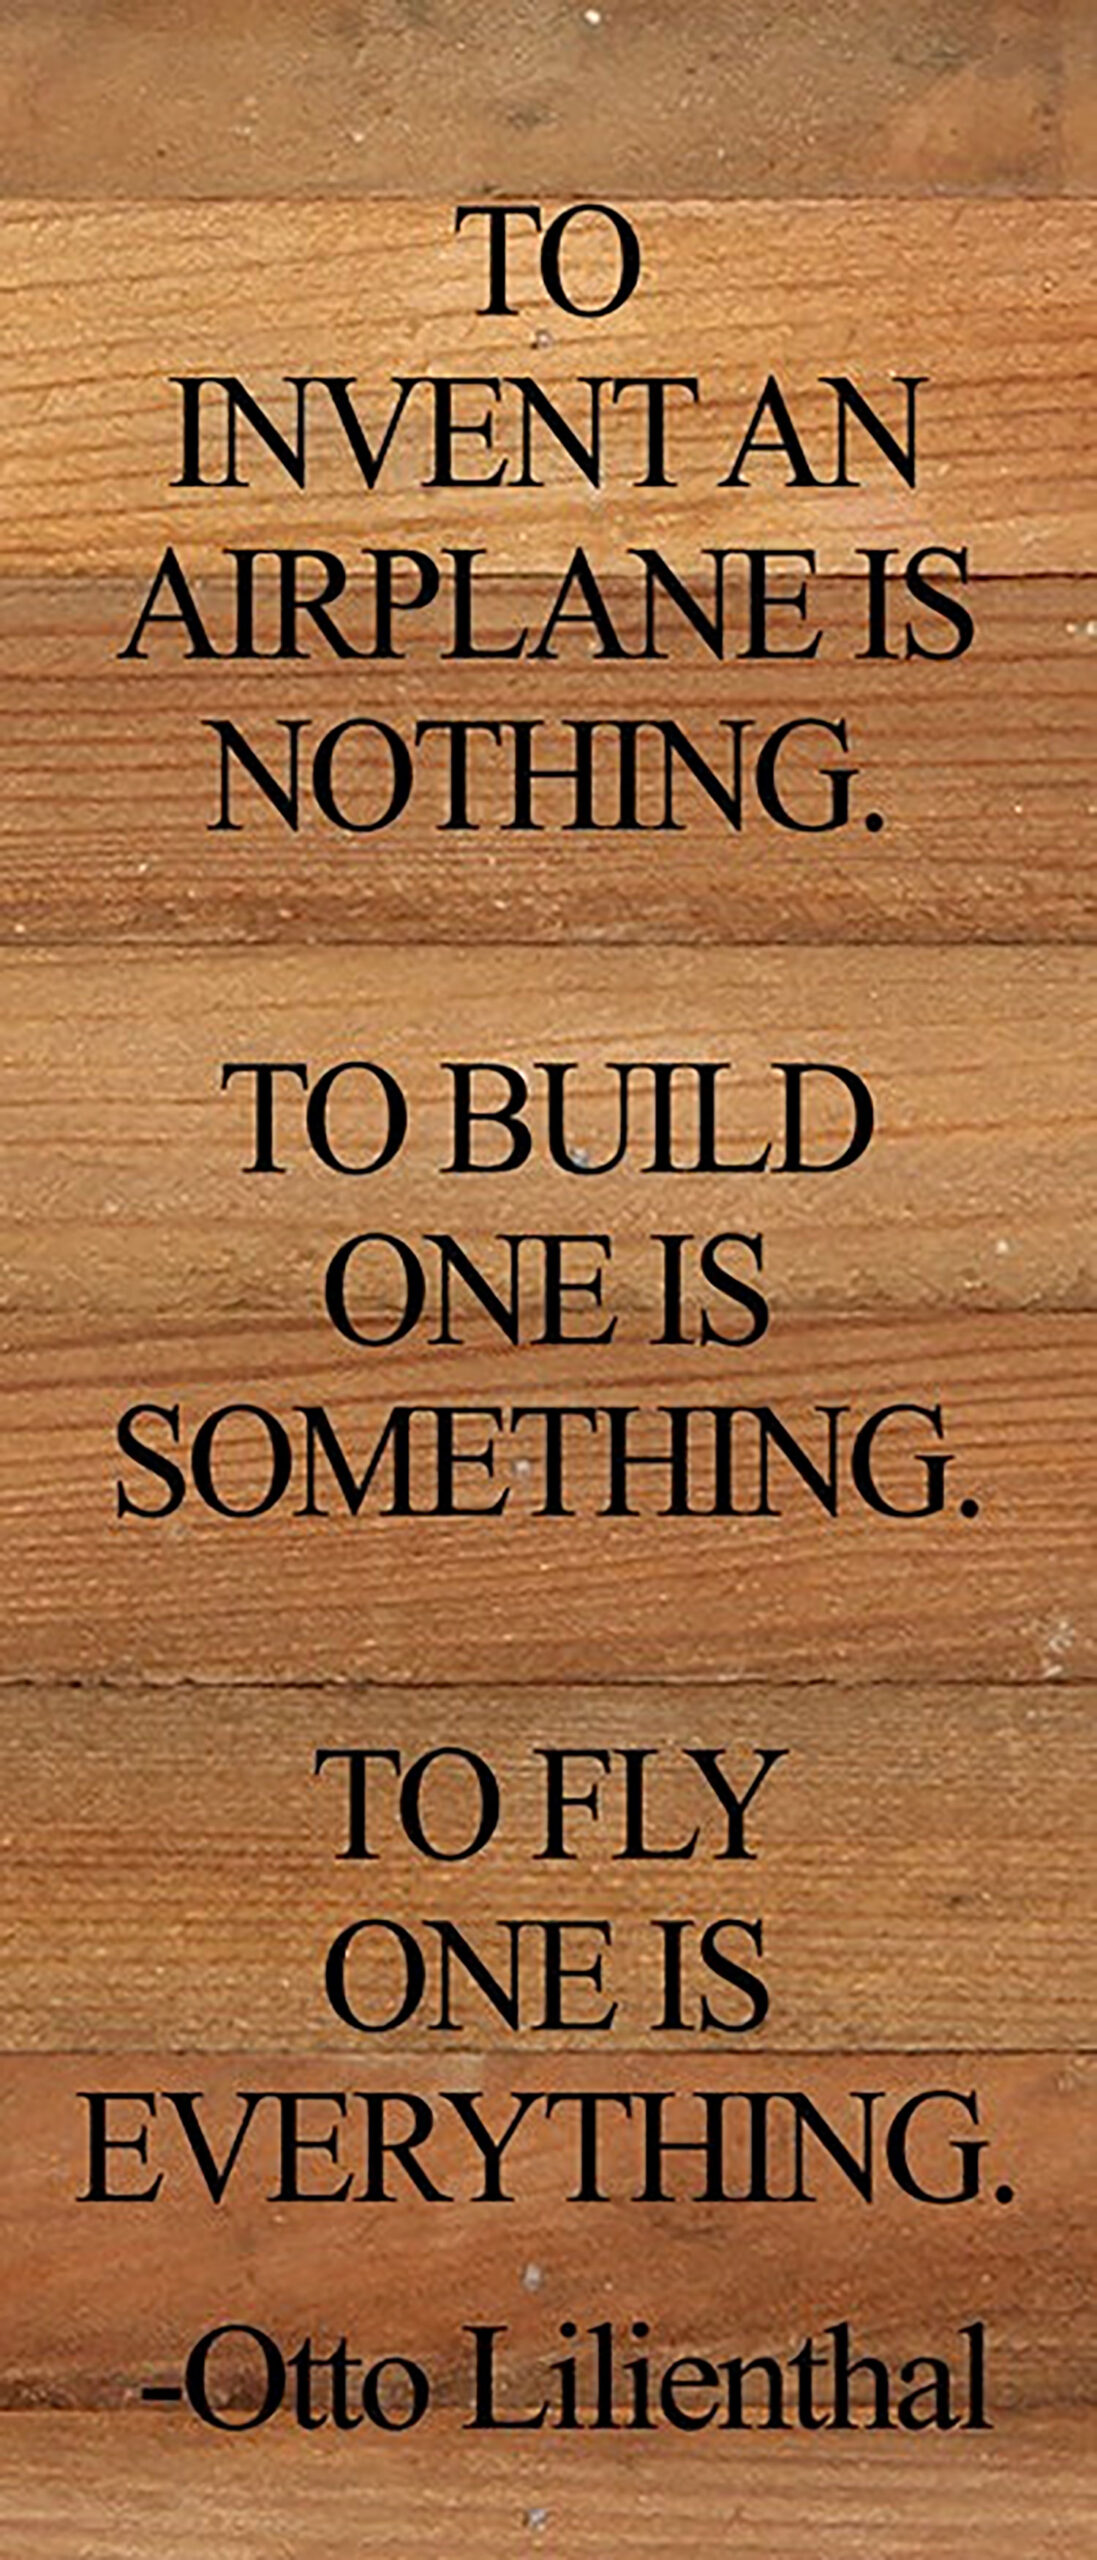 To invent an airplane is nothing. To build one is something. To fly one is everything. -Otto Lilienthal / 6"x14" Reclaimed Wood Sign